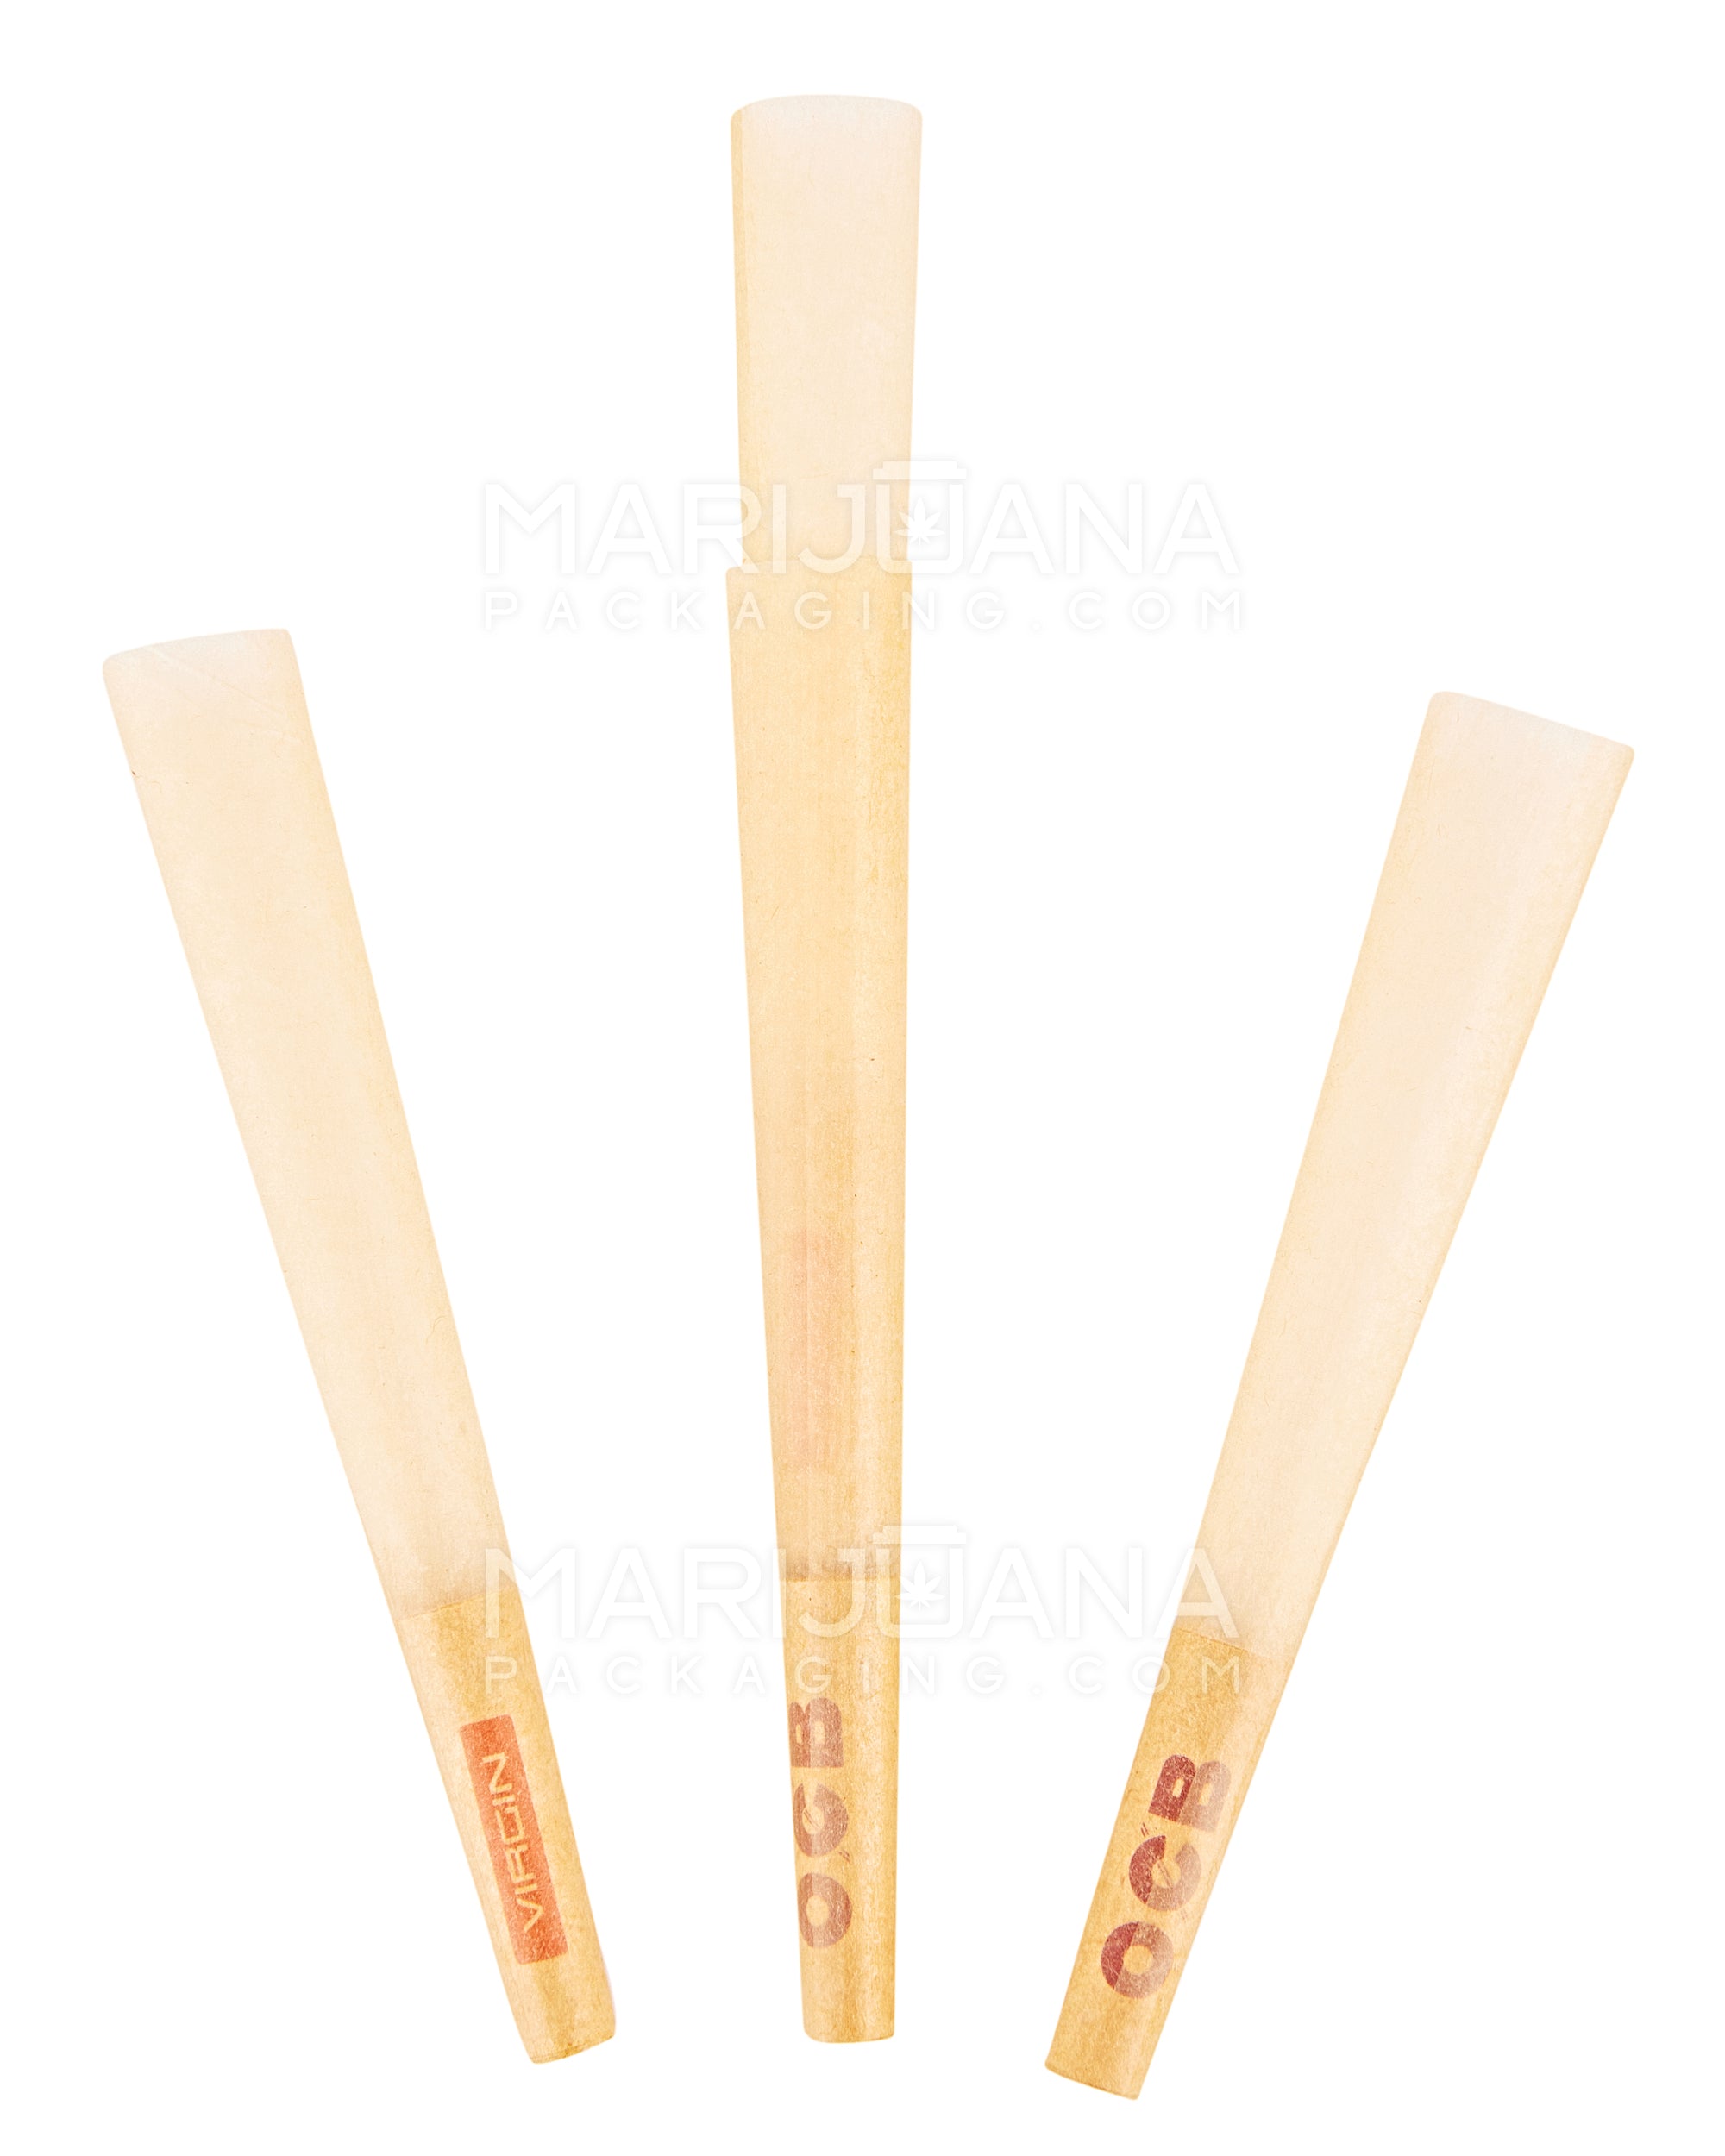 OCB | 1 1/4 Size Virgin Pre-Rolled Cones | 84mm - Unbleached Paper - 900 Count - 3